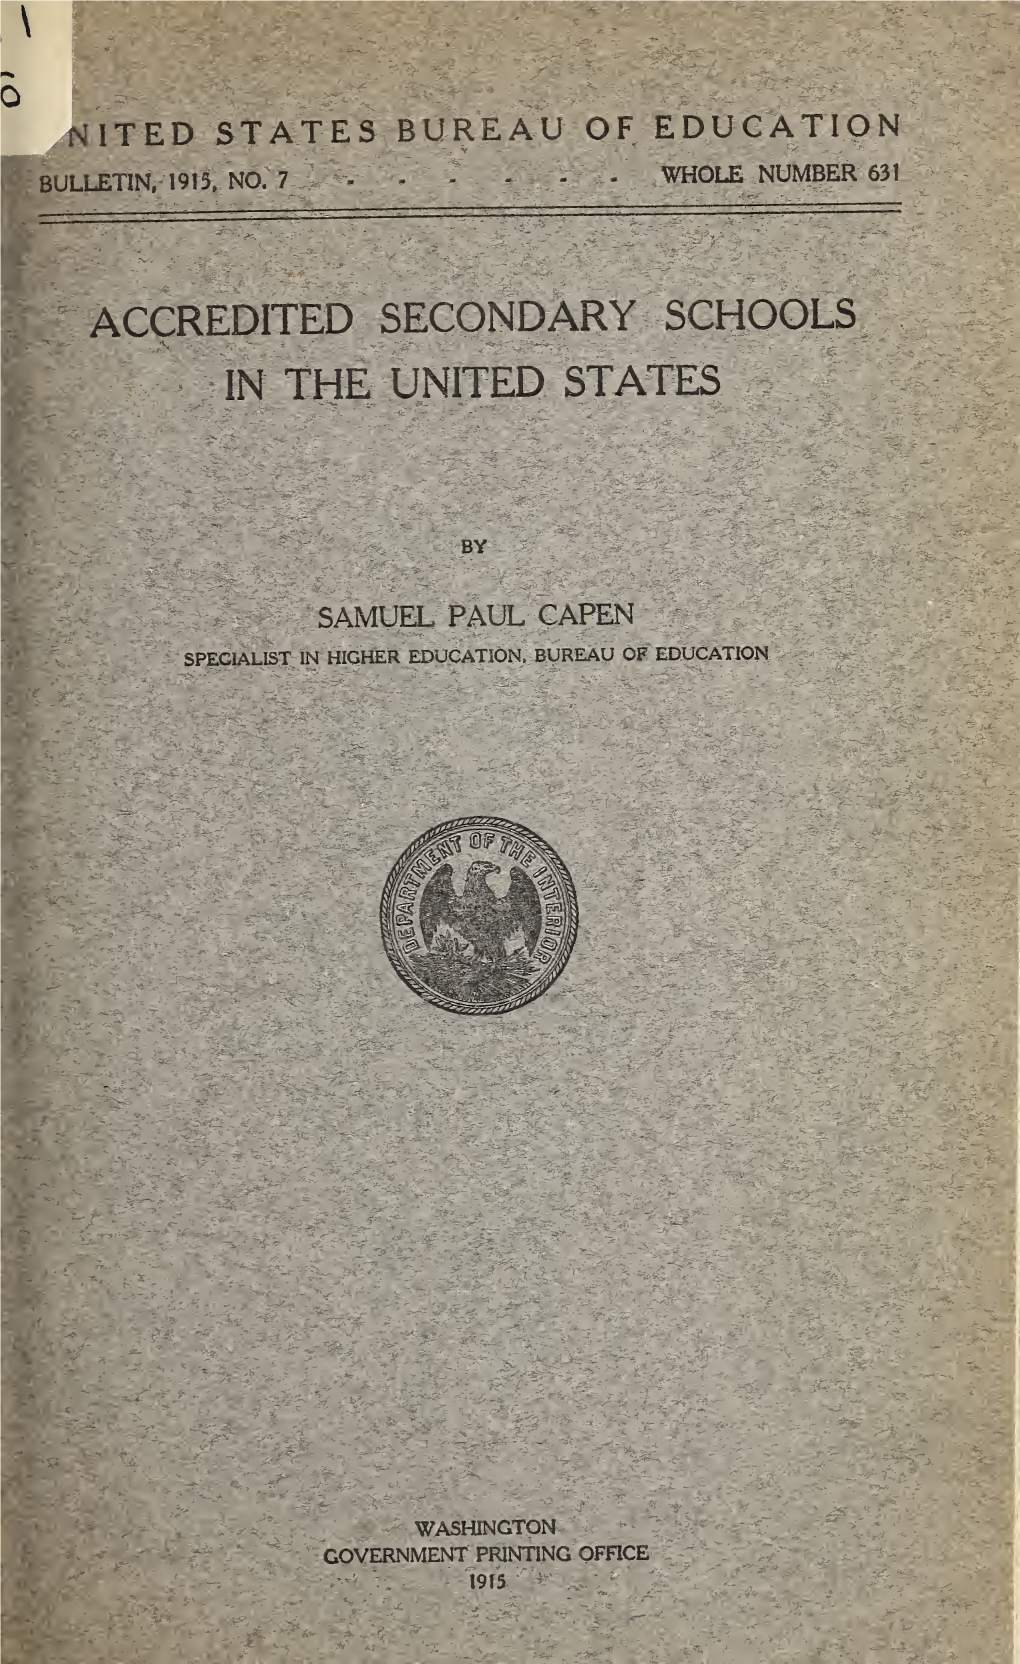 Accredited Secondary Schools in the United States. Bulletin 1915